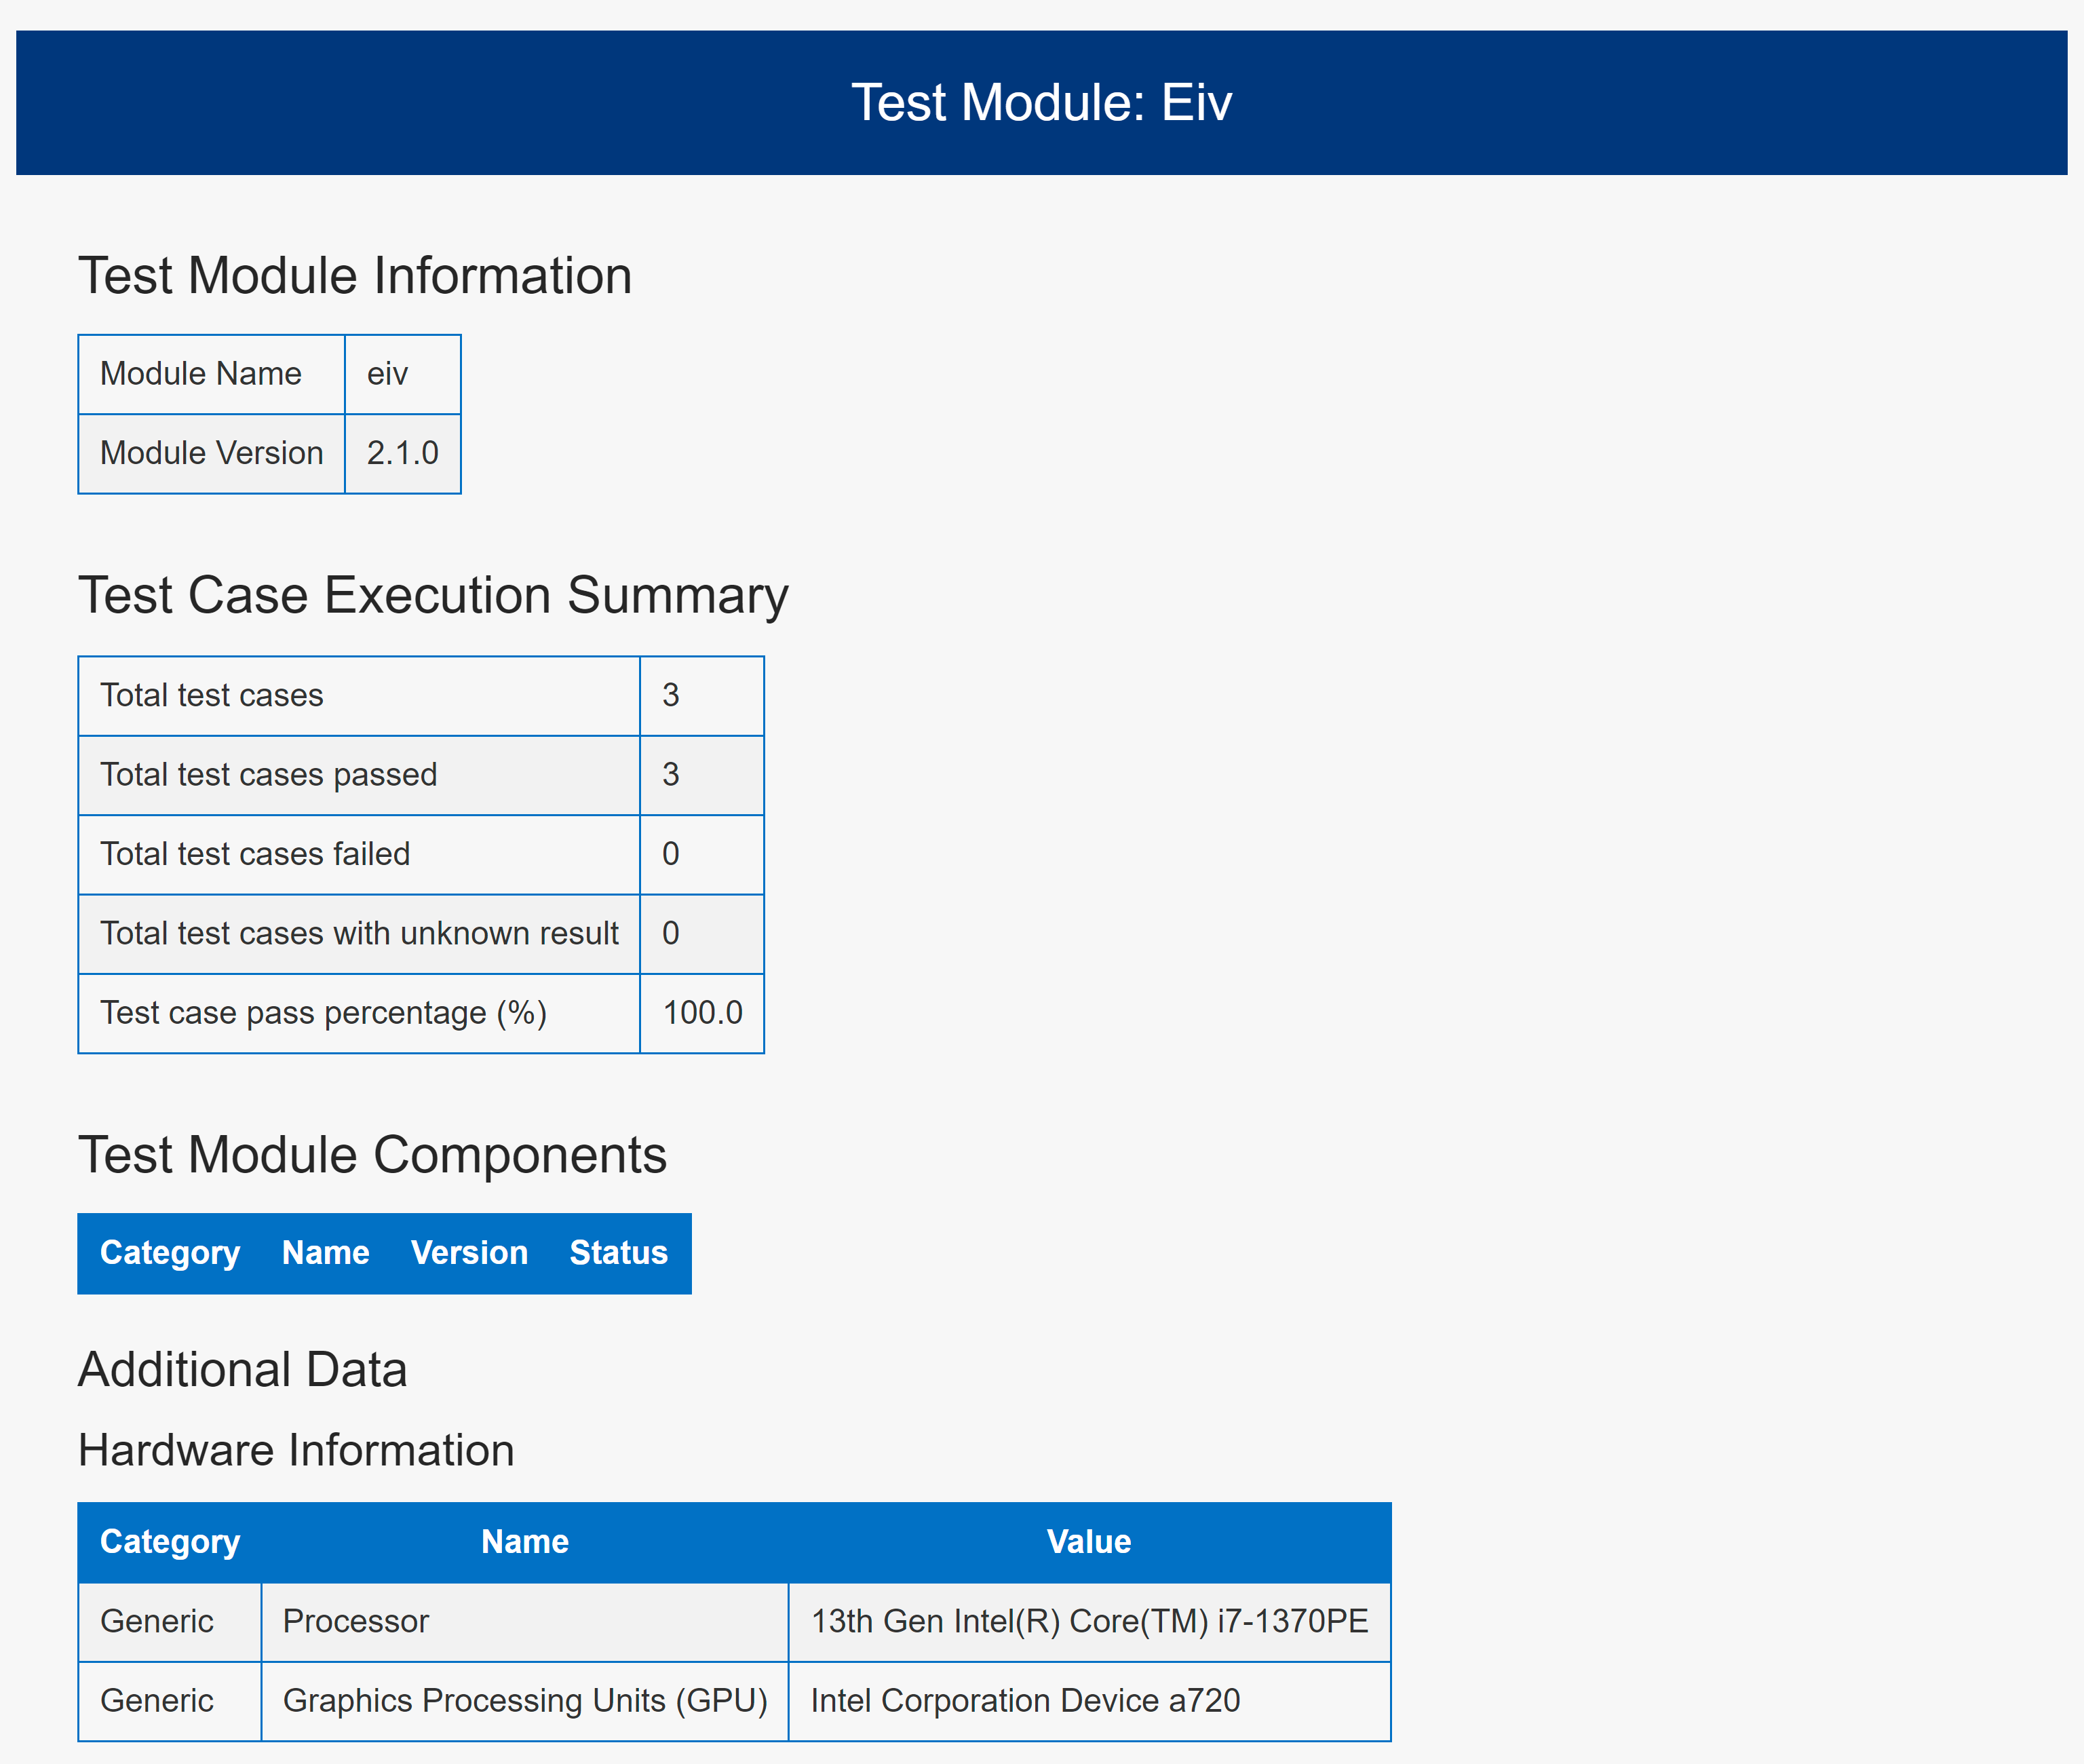 Test report showing test module information, test execution summary showing all three test cases passed, and hardware information. 